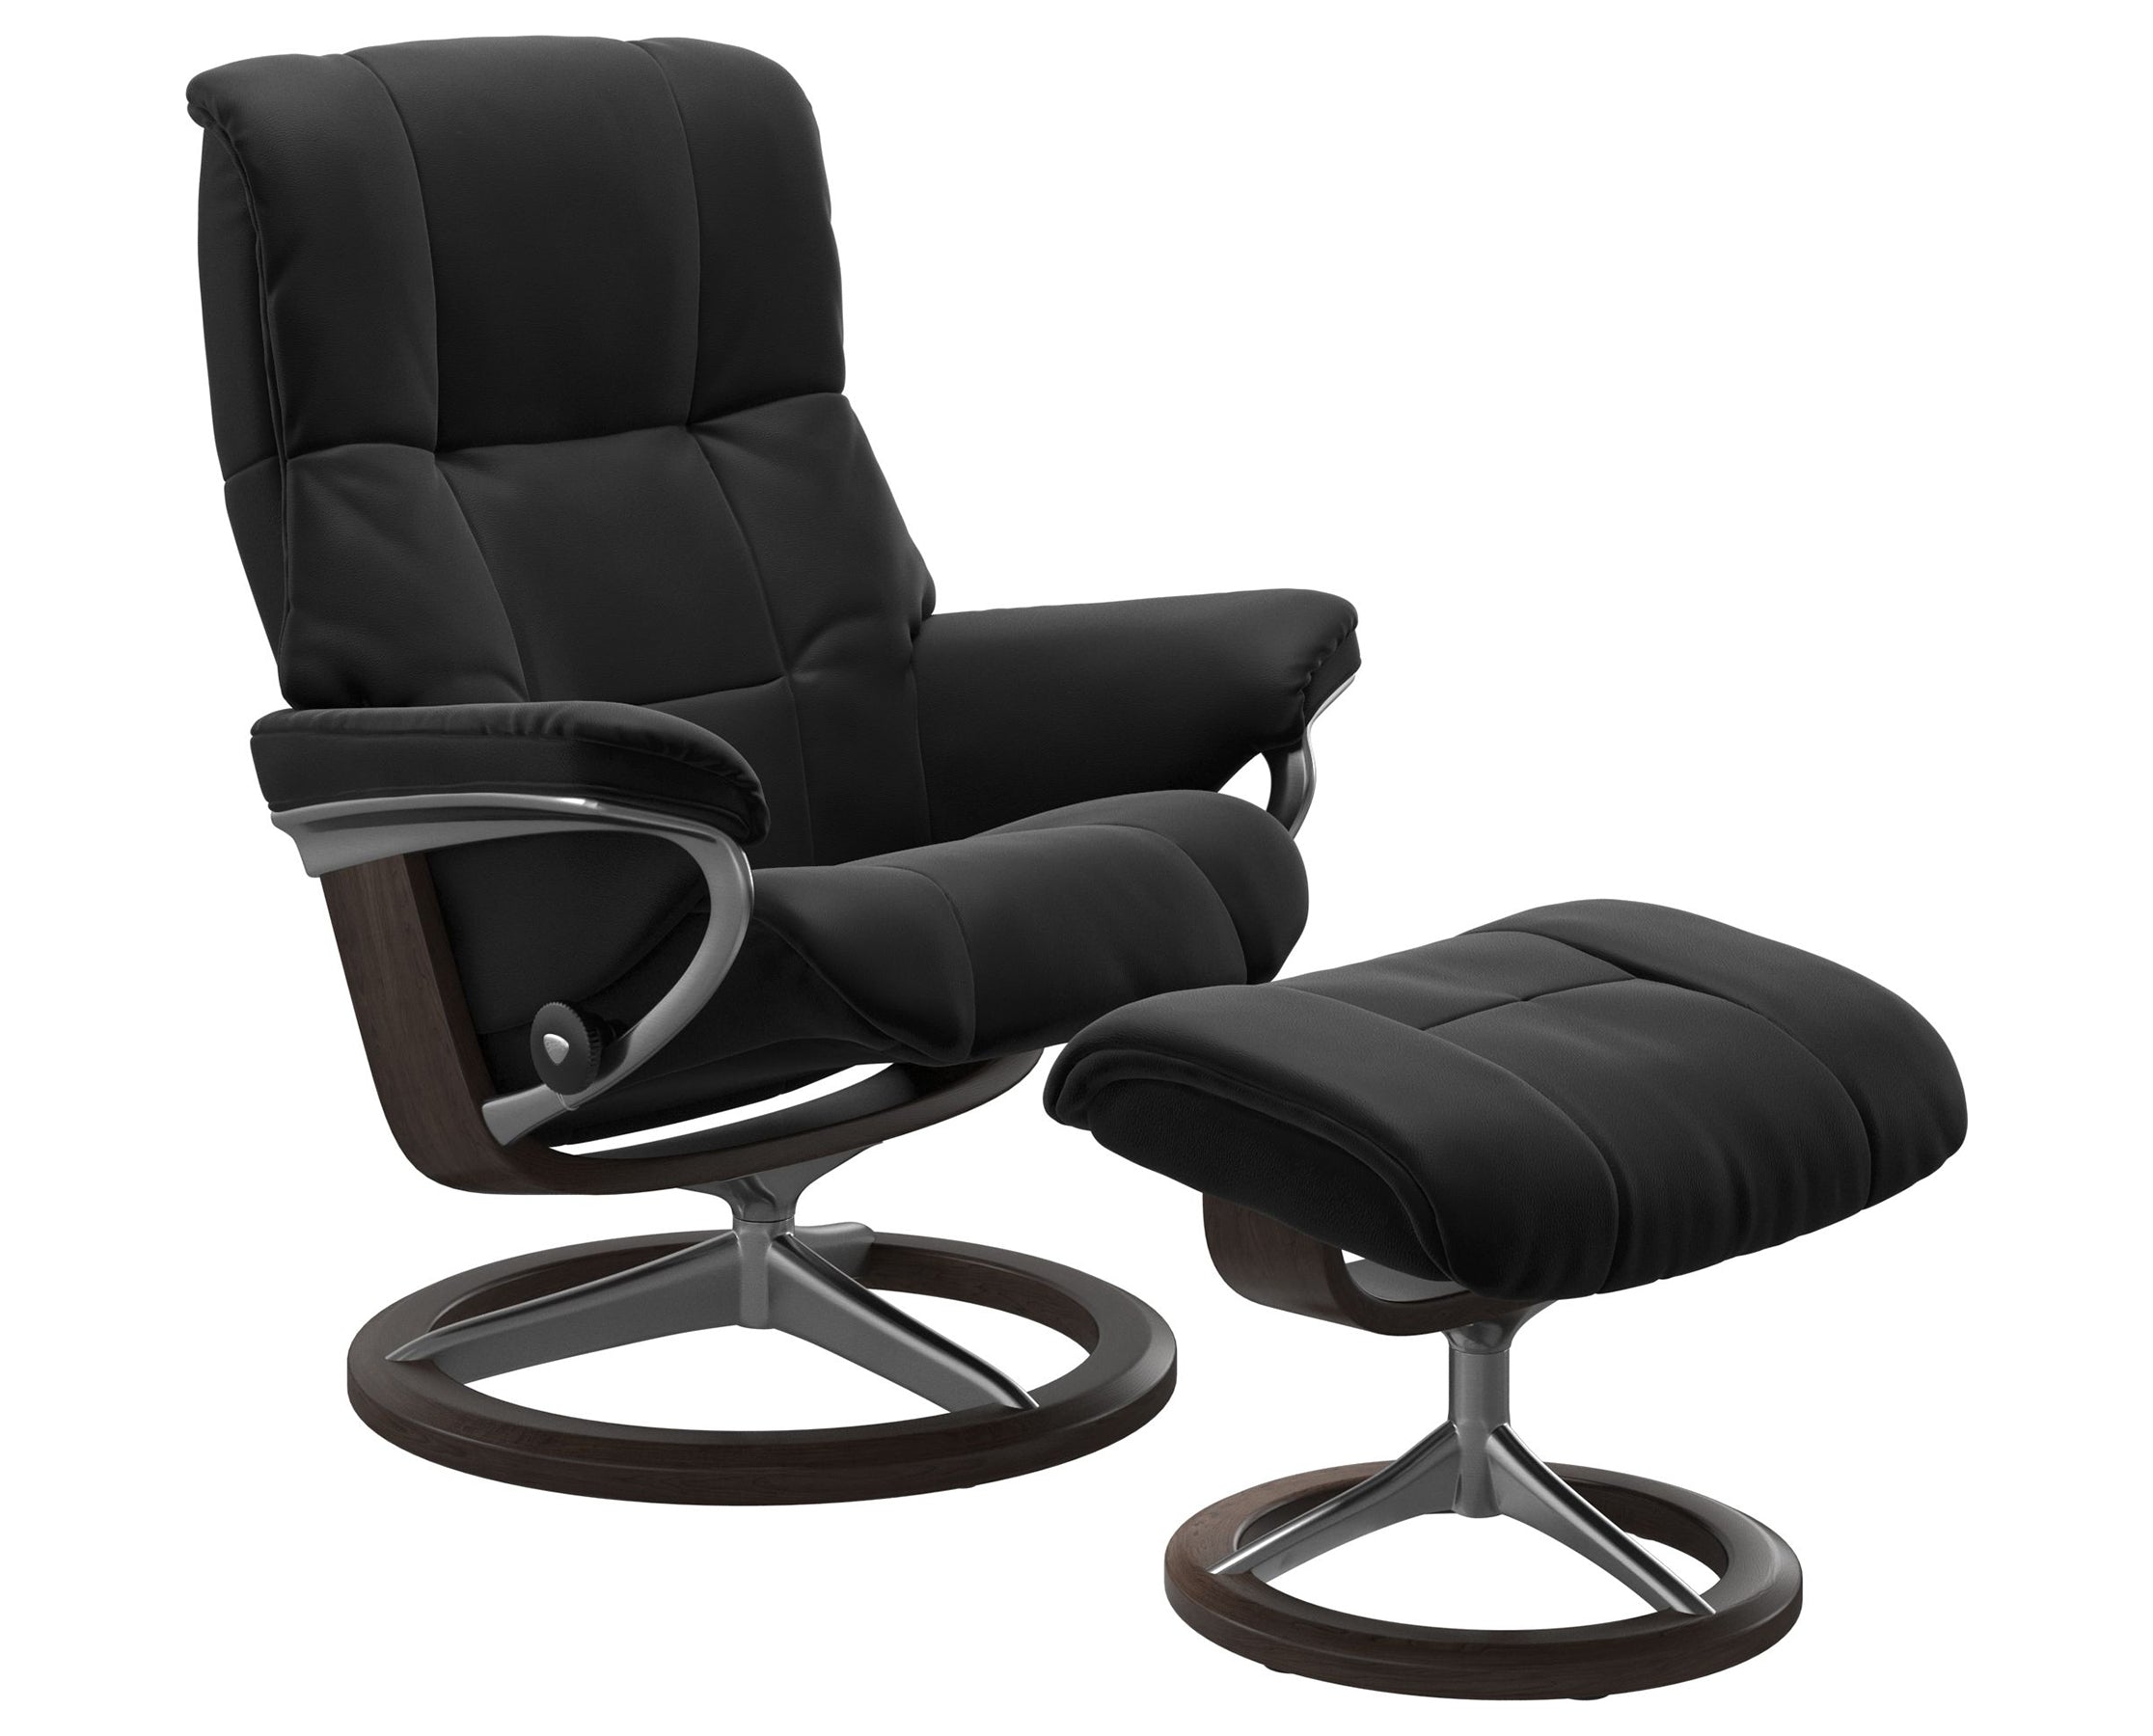 Paloma Leather Black S/M/L and Wenge Base | Stressless Mayfair Signature Recliner | Valley Ridge Furniture